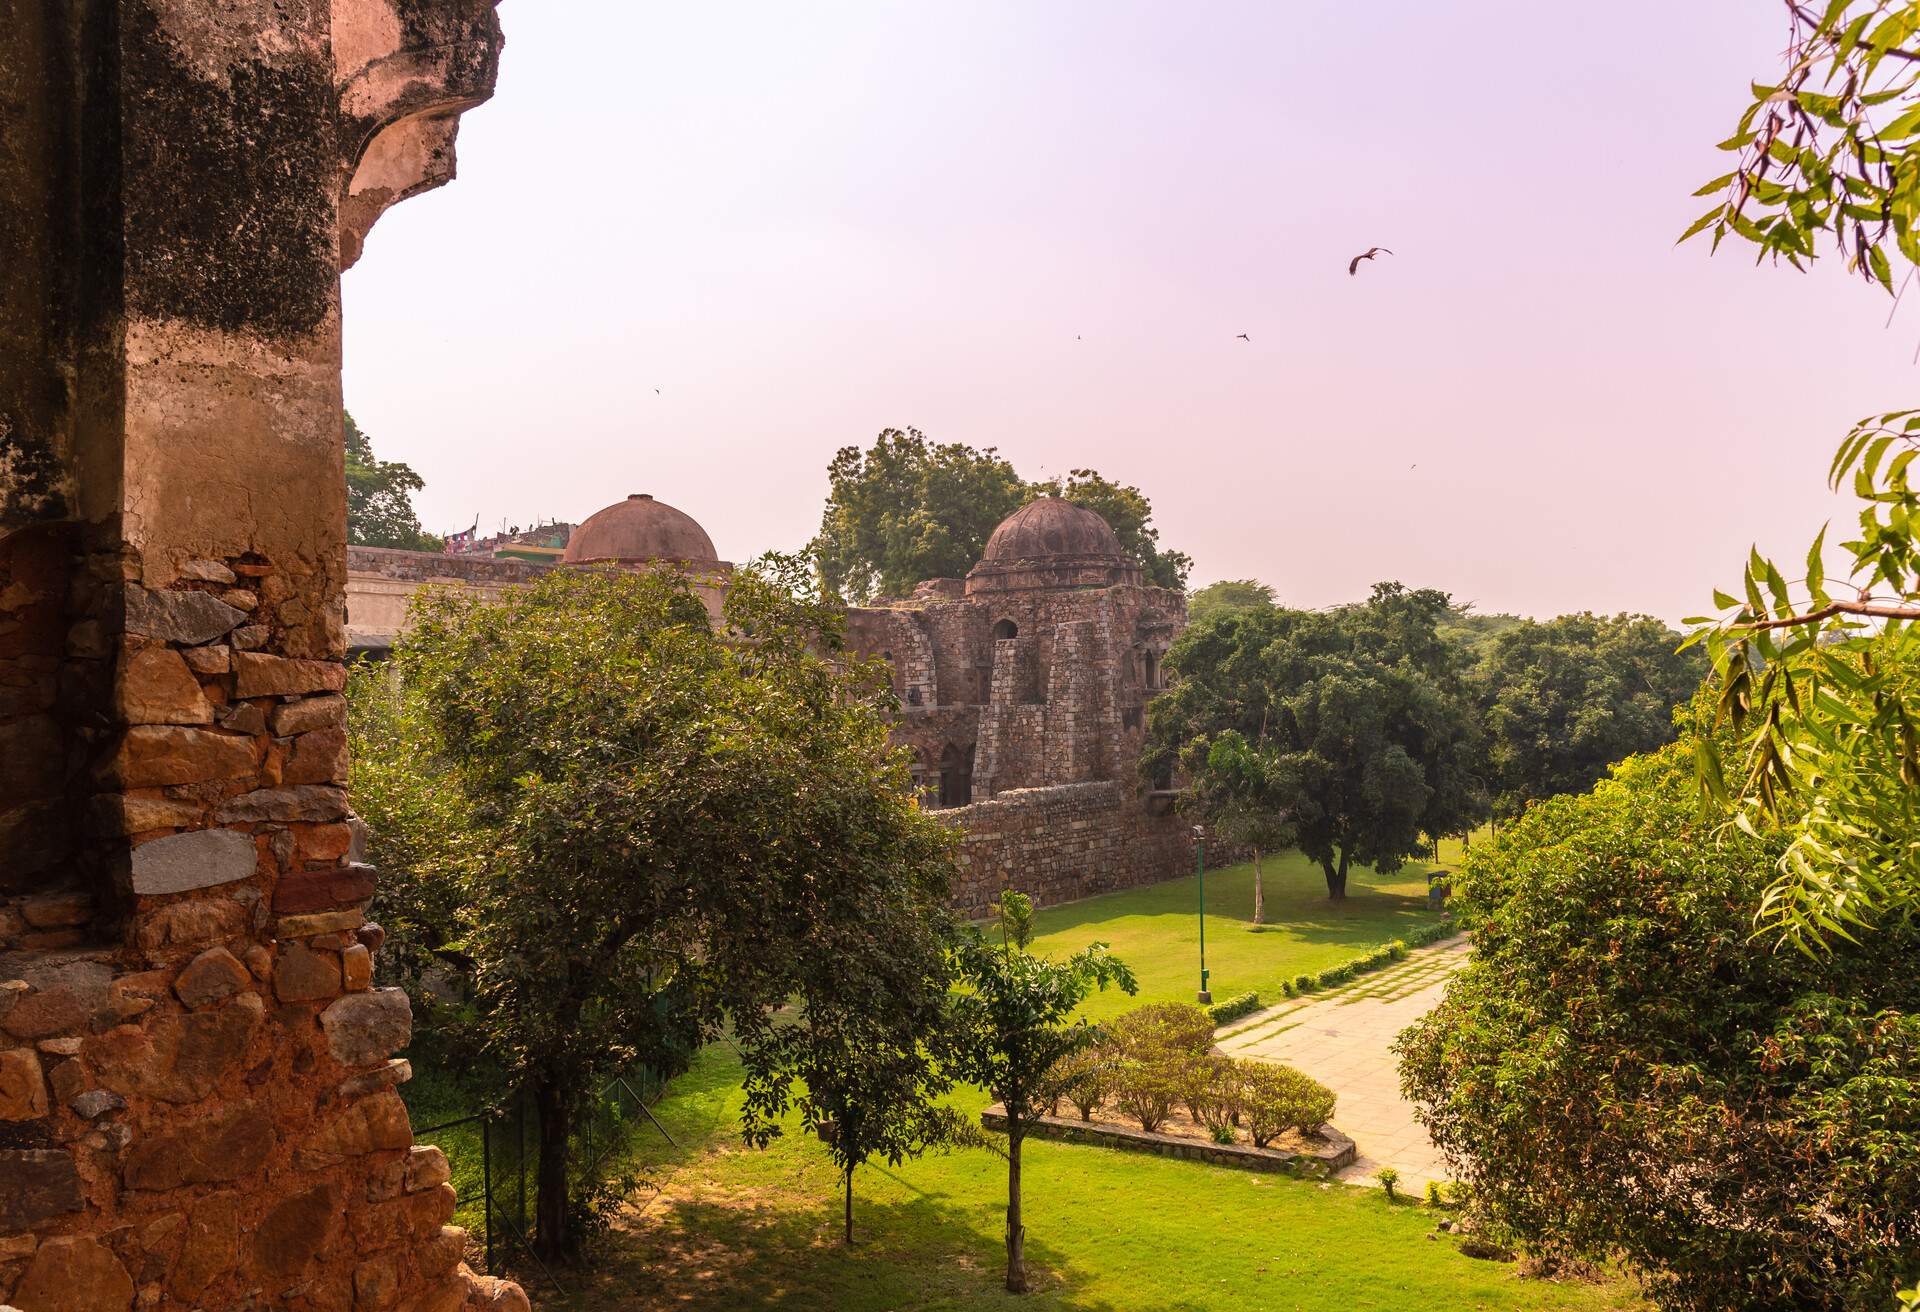 Ruined Buildings of Hauz Khas village,known in the medieval period for the amazing buildings built around a reservoir and drew a large congregation of Islamic scholars.